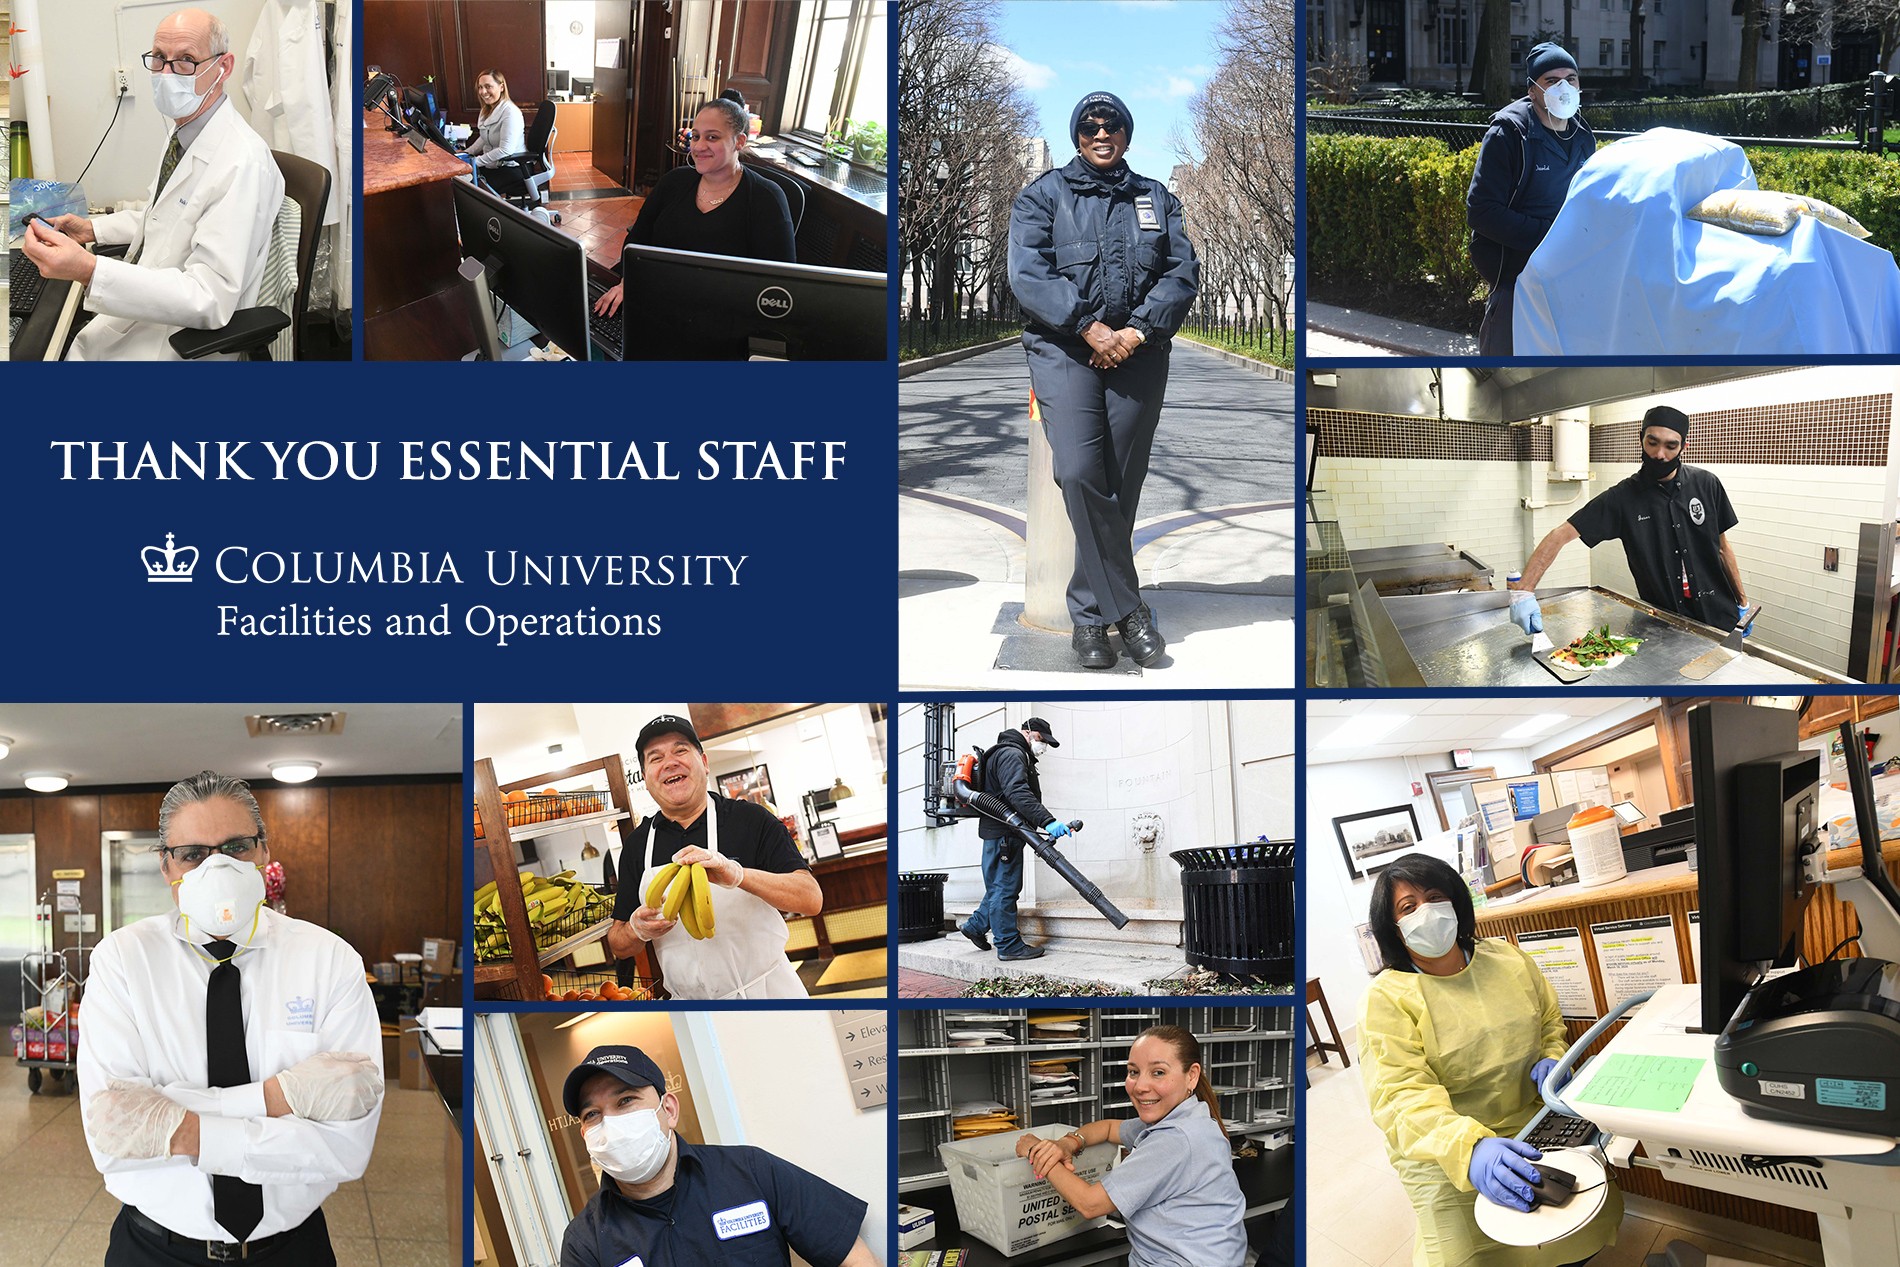 A collage of essential workers, featuring healthcare, housing, custodial, grounds, public safety, mail, and dining workers.